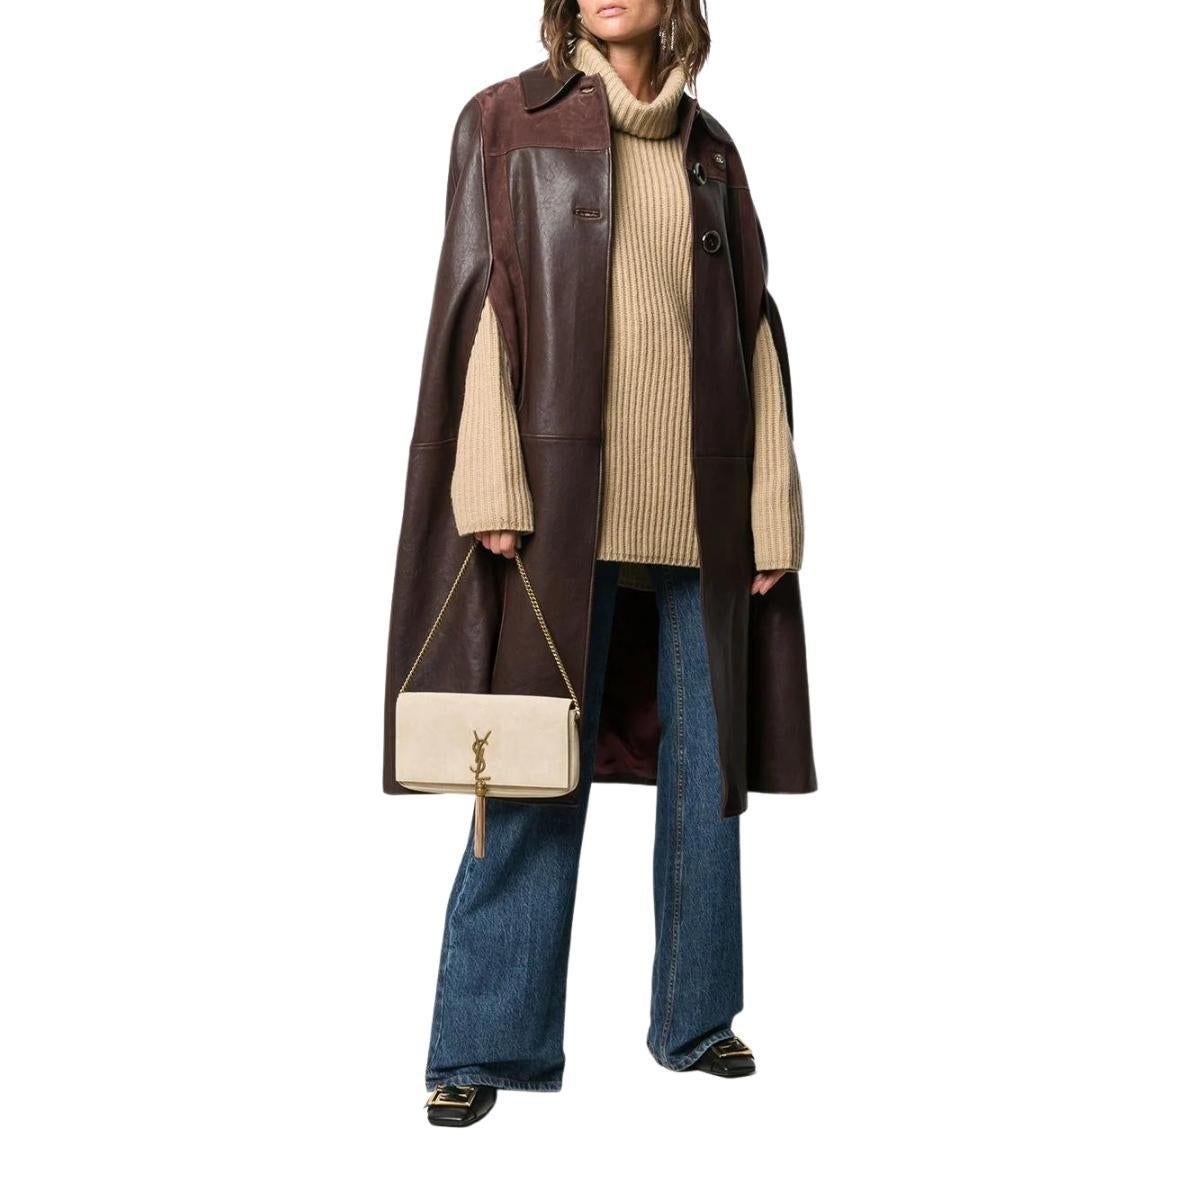 Chocolate-brown cape
Grained leather
Suede panels
Gold GG plaque. 
Classic collar
Front button fastening
Armholes
Burgundy logo-jacquard lining.
Composition: Lamb Skin 100%
Lining: Viscose 100%
Designer Style ID: 624144XNALD
Made in Italy